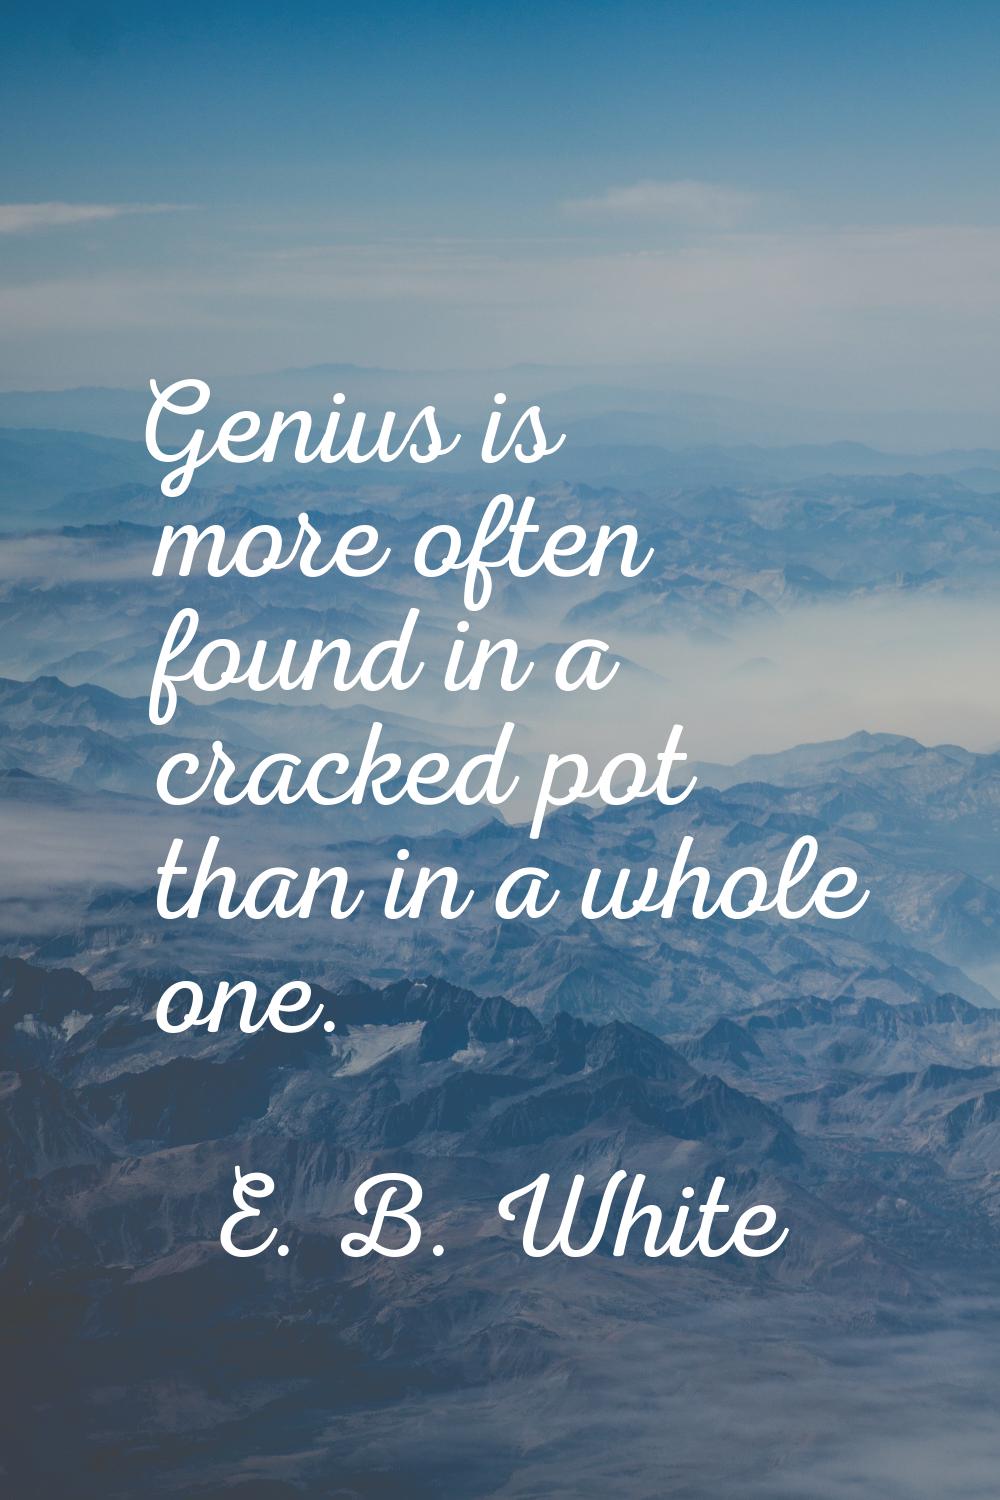 Genius is more often found in a cracked pot than in a whole one.